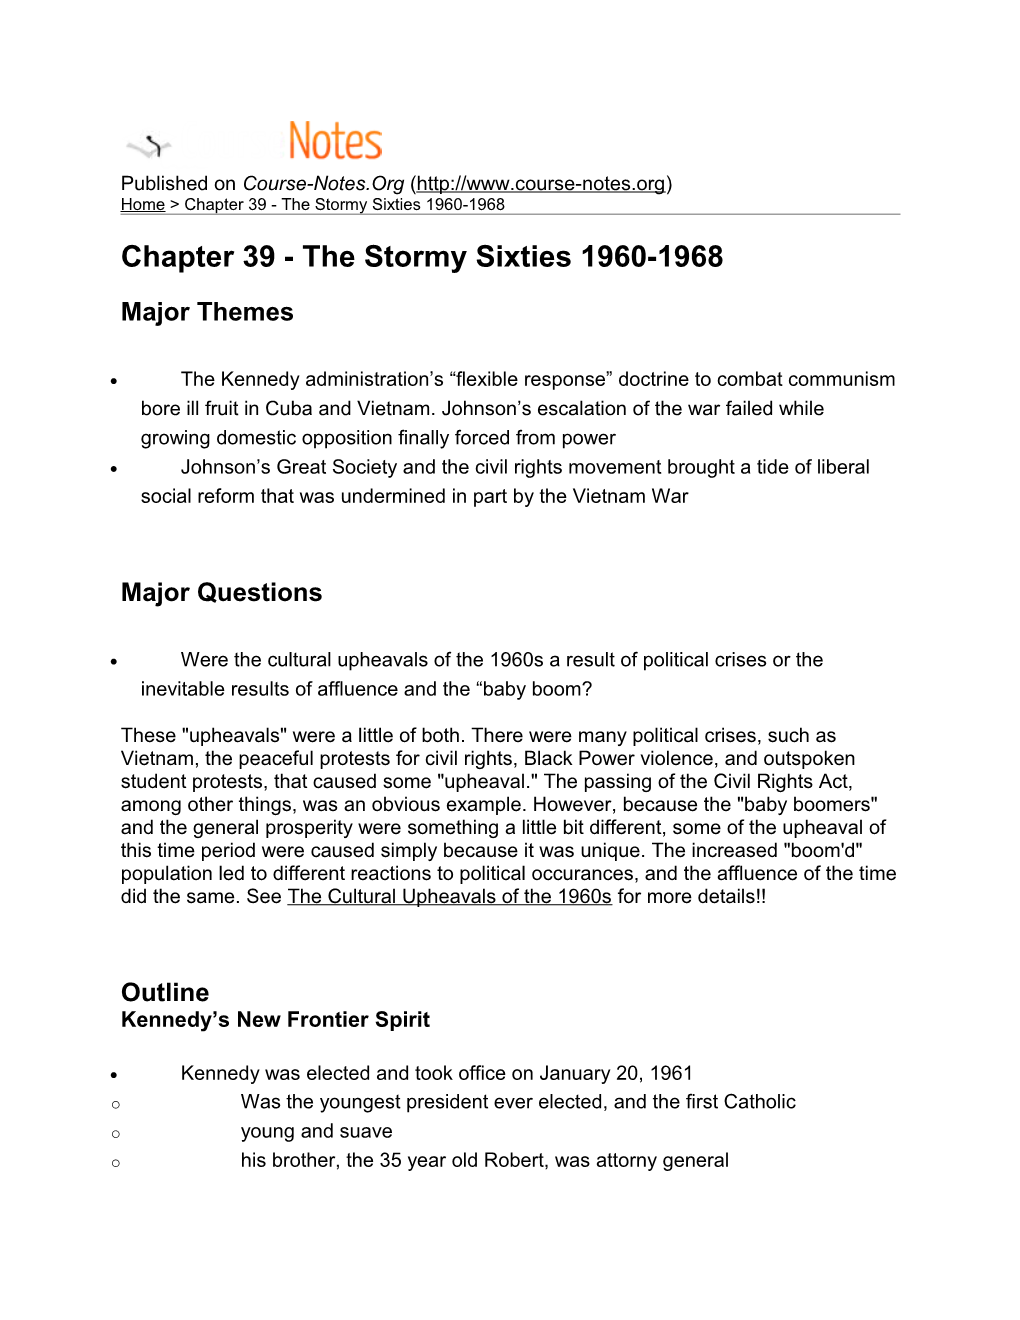 Chapter 39 - the Stormy Sixties 1960-1968